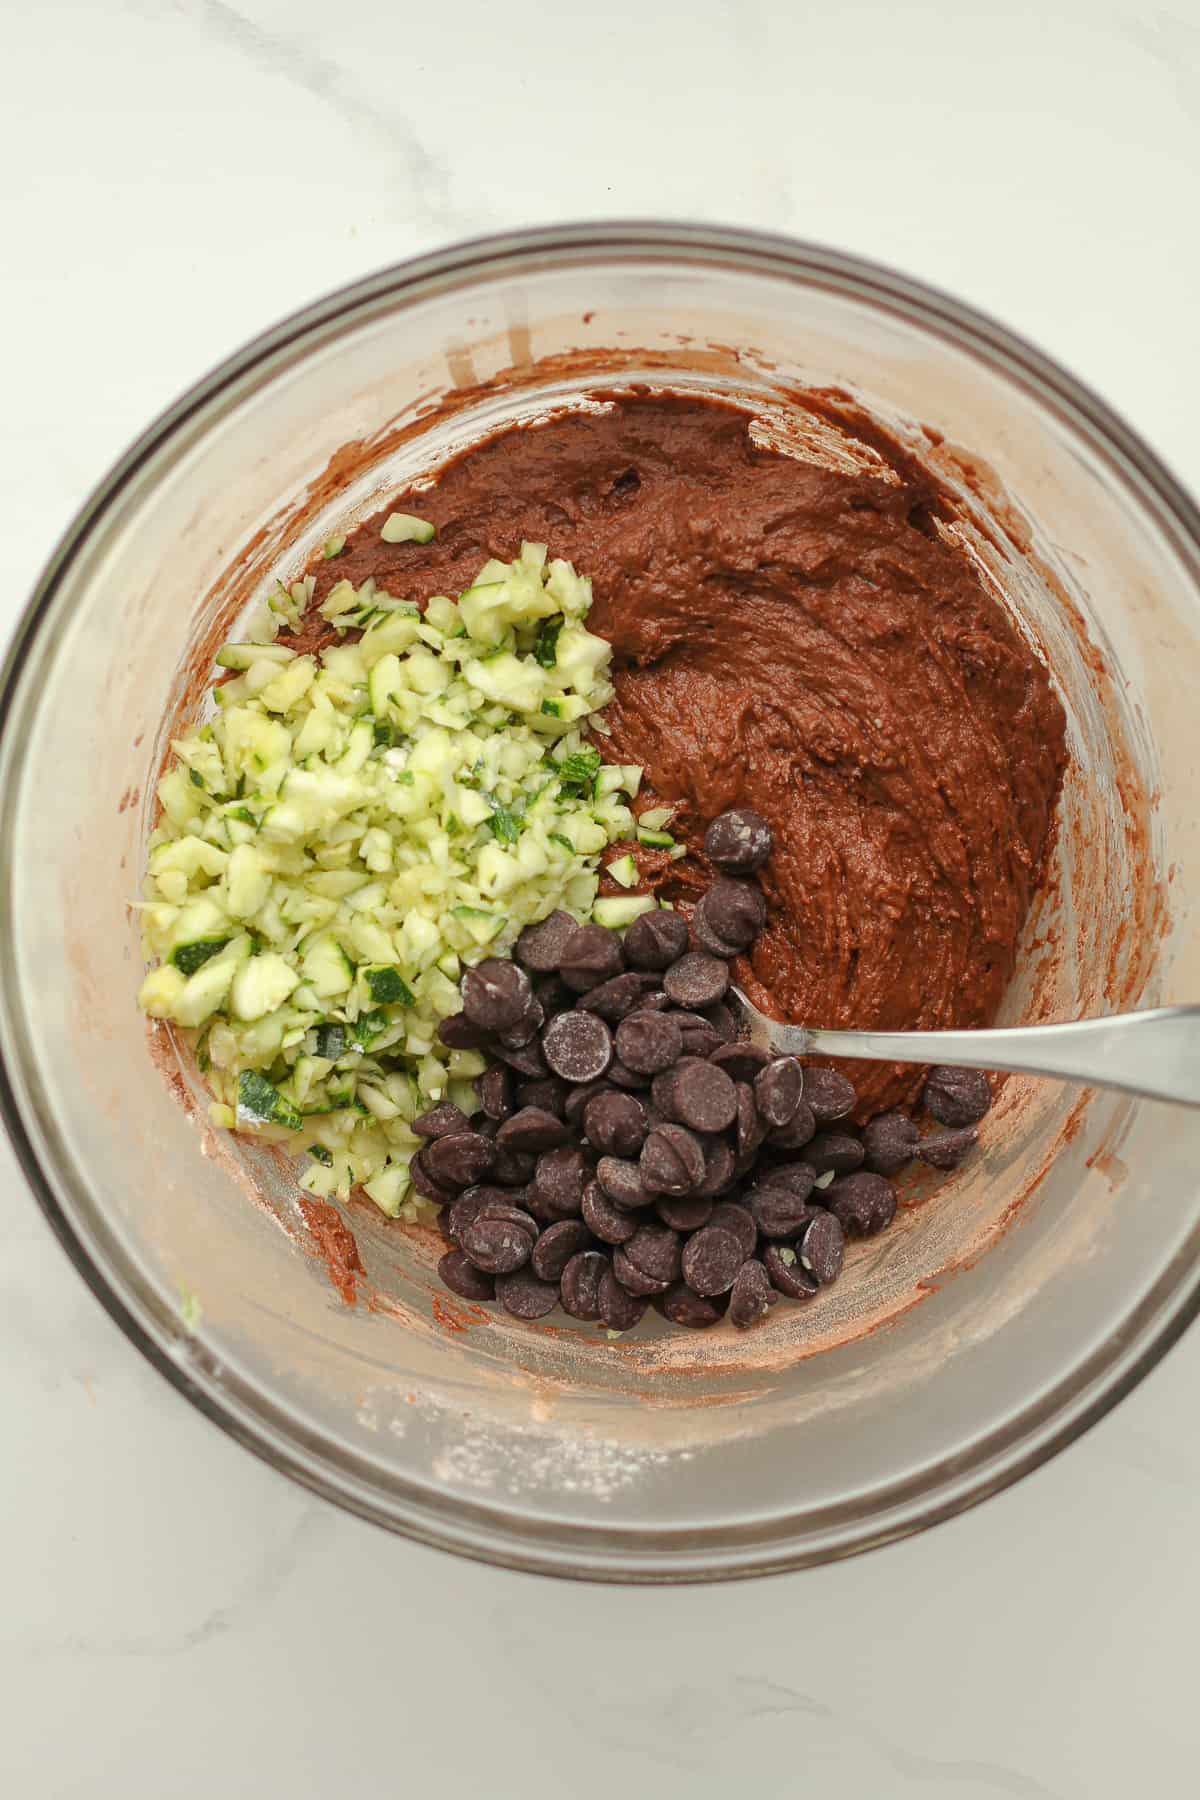 A bowl of the batter with zucchini and chocolate chips on top.